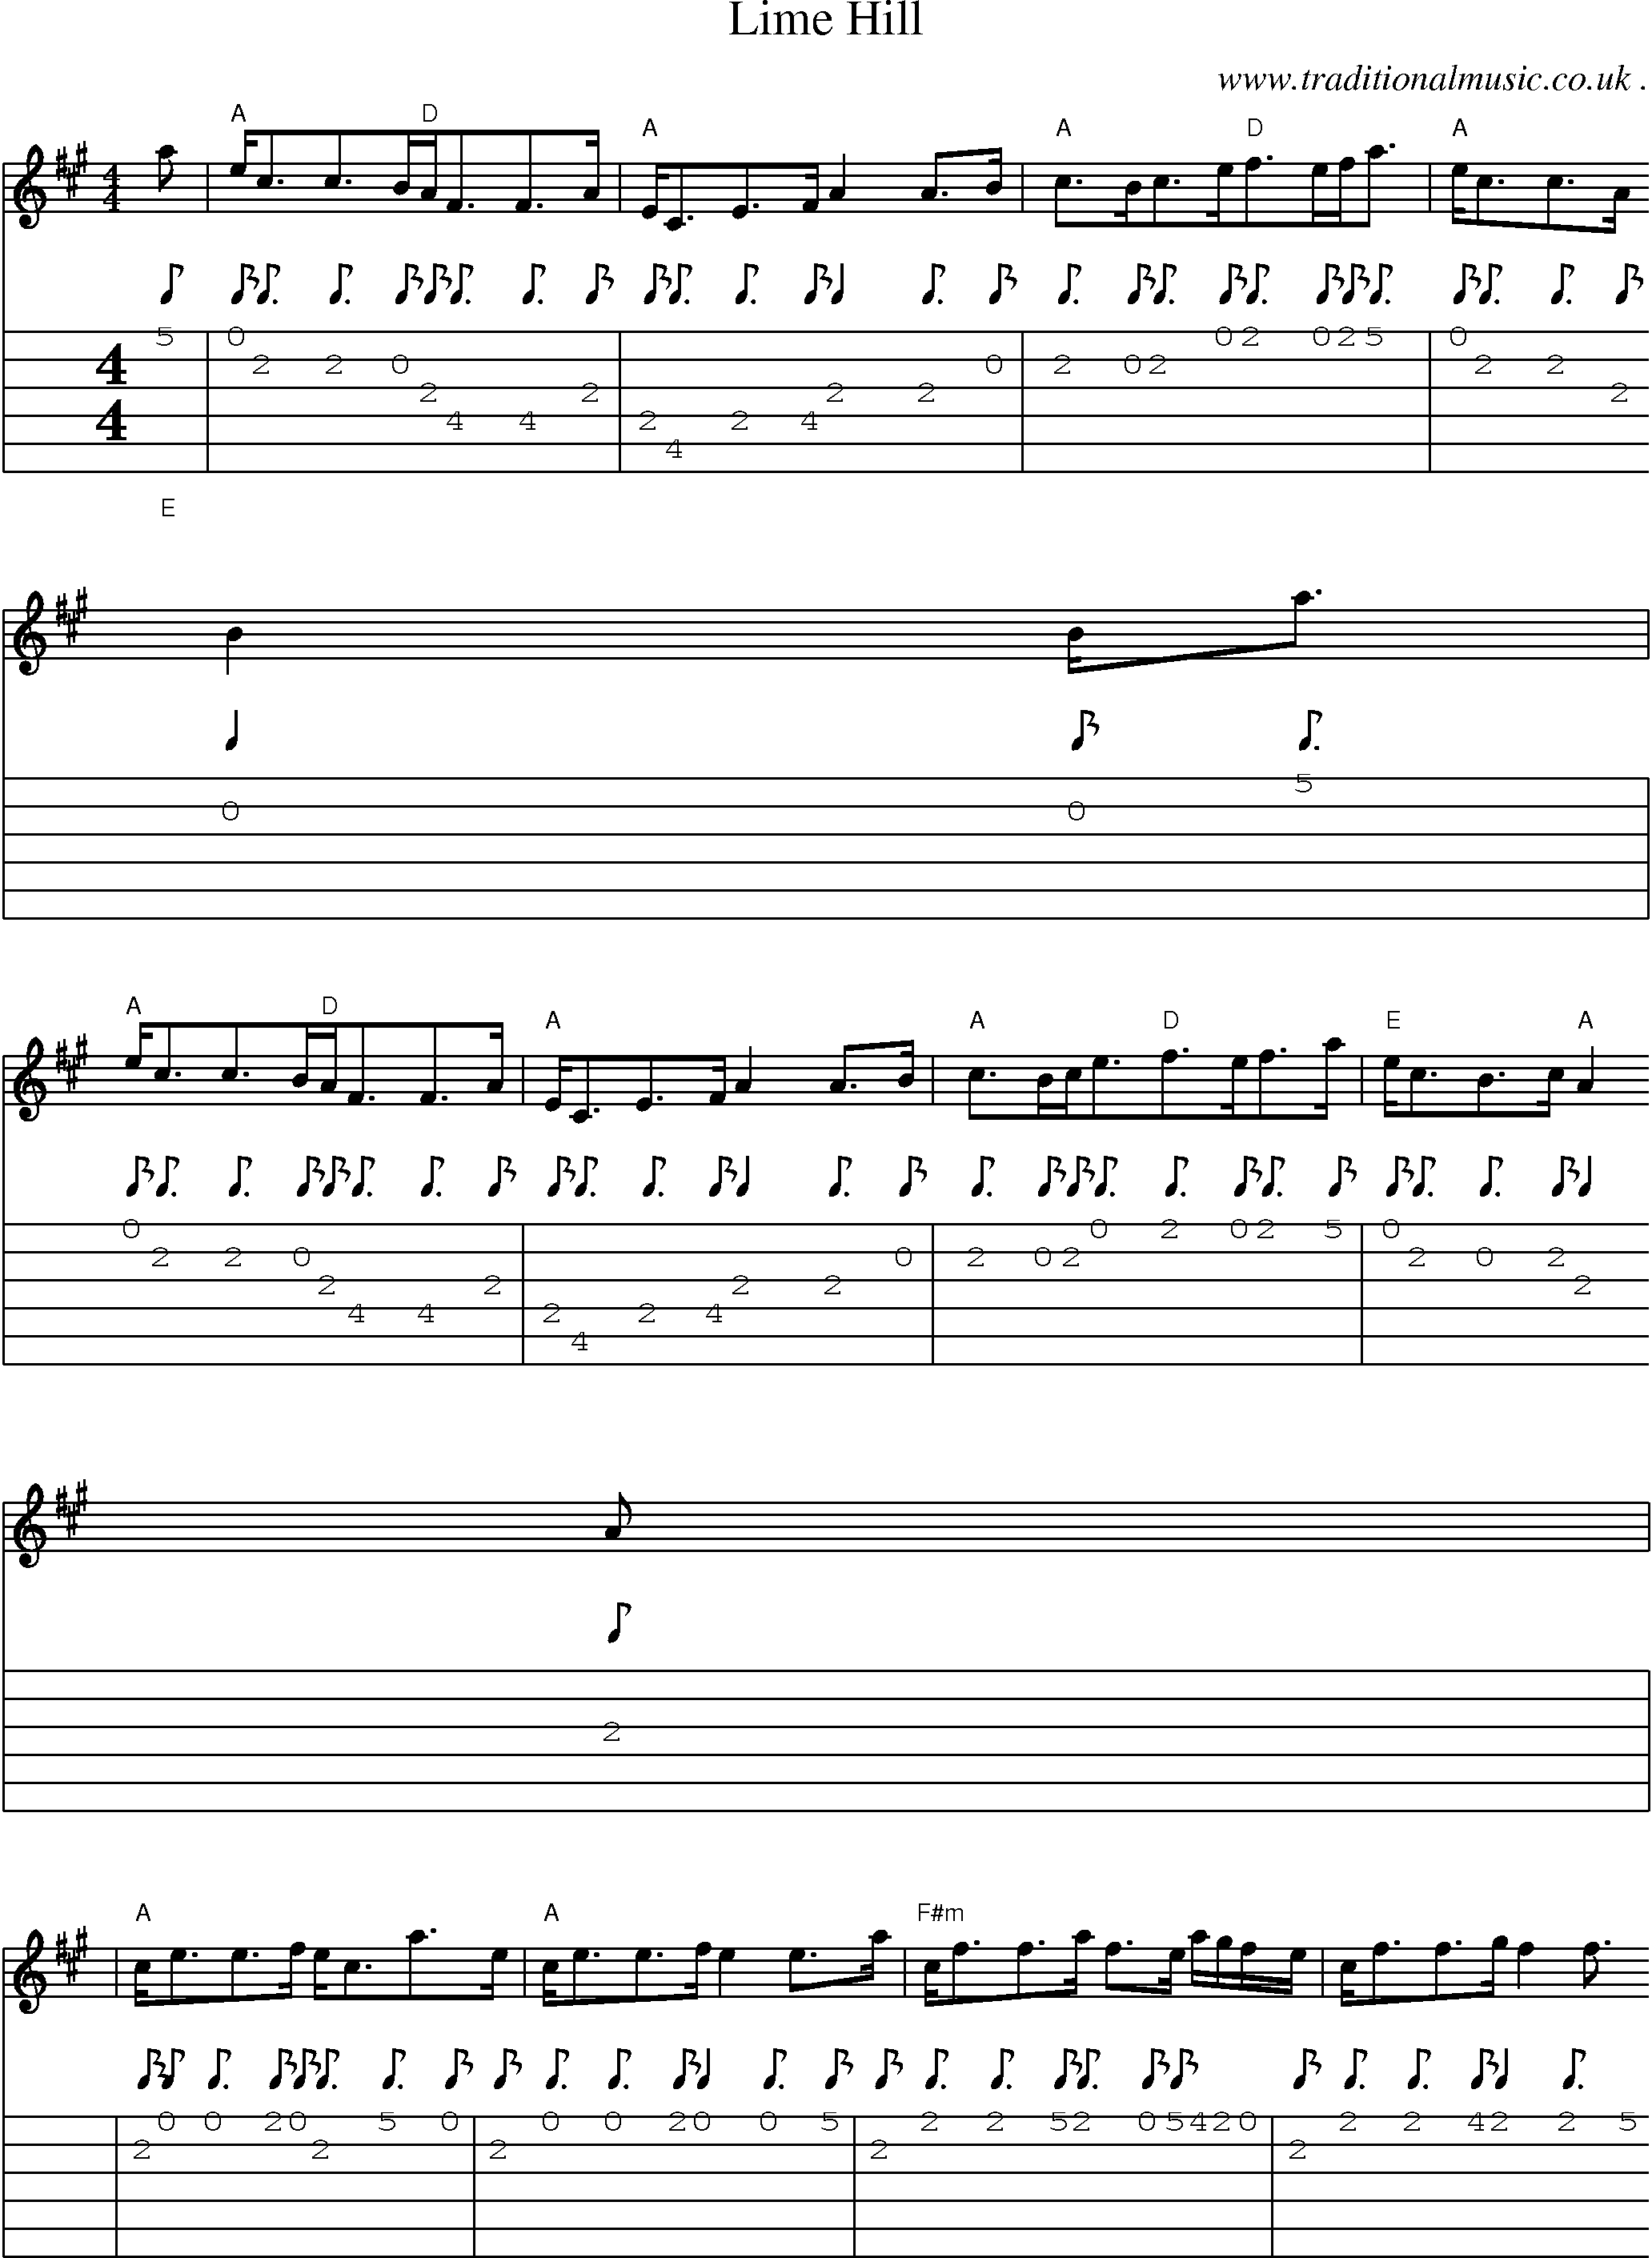 Sheet-Music and Guitar Tabs for Lime Hill